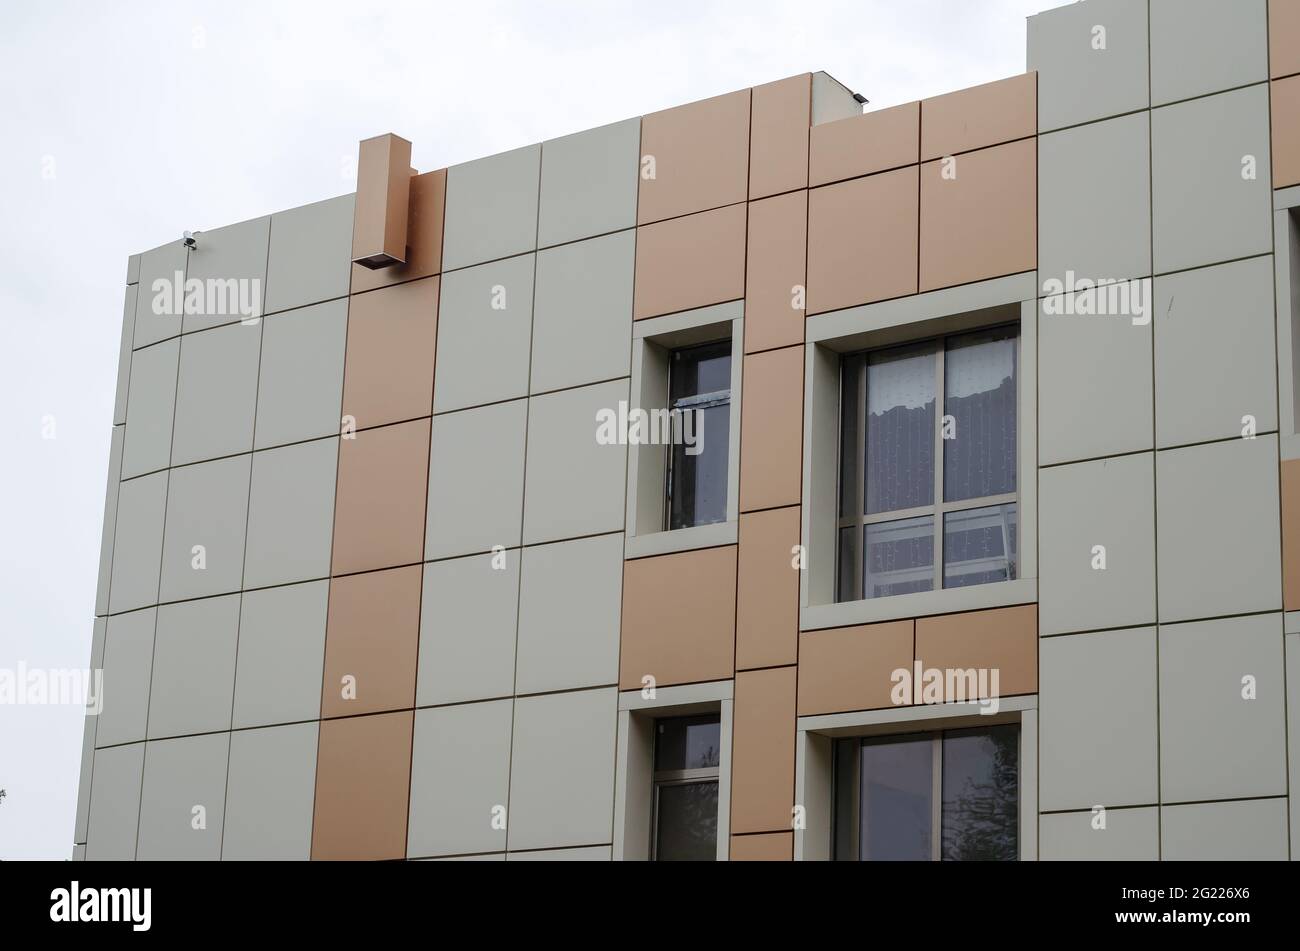 The beige and brown facade of a modern building against an overcast sky. Daytime. Shooting in the rain. Architecture. Stock Photo